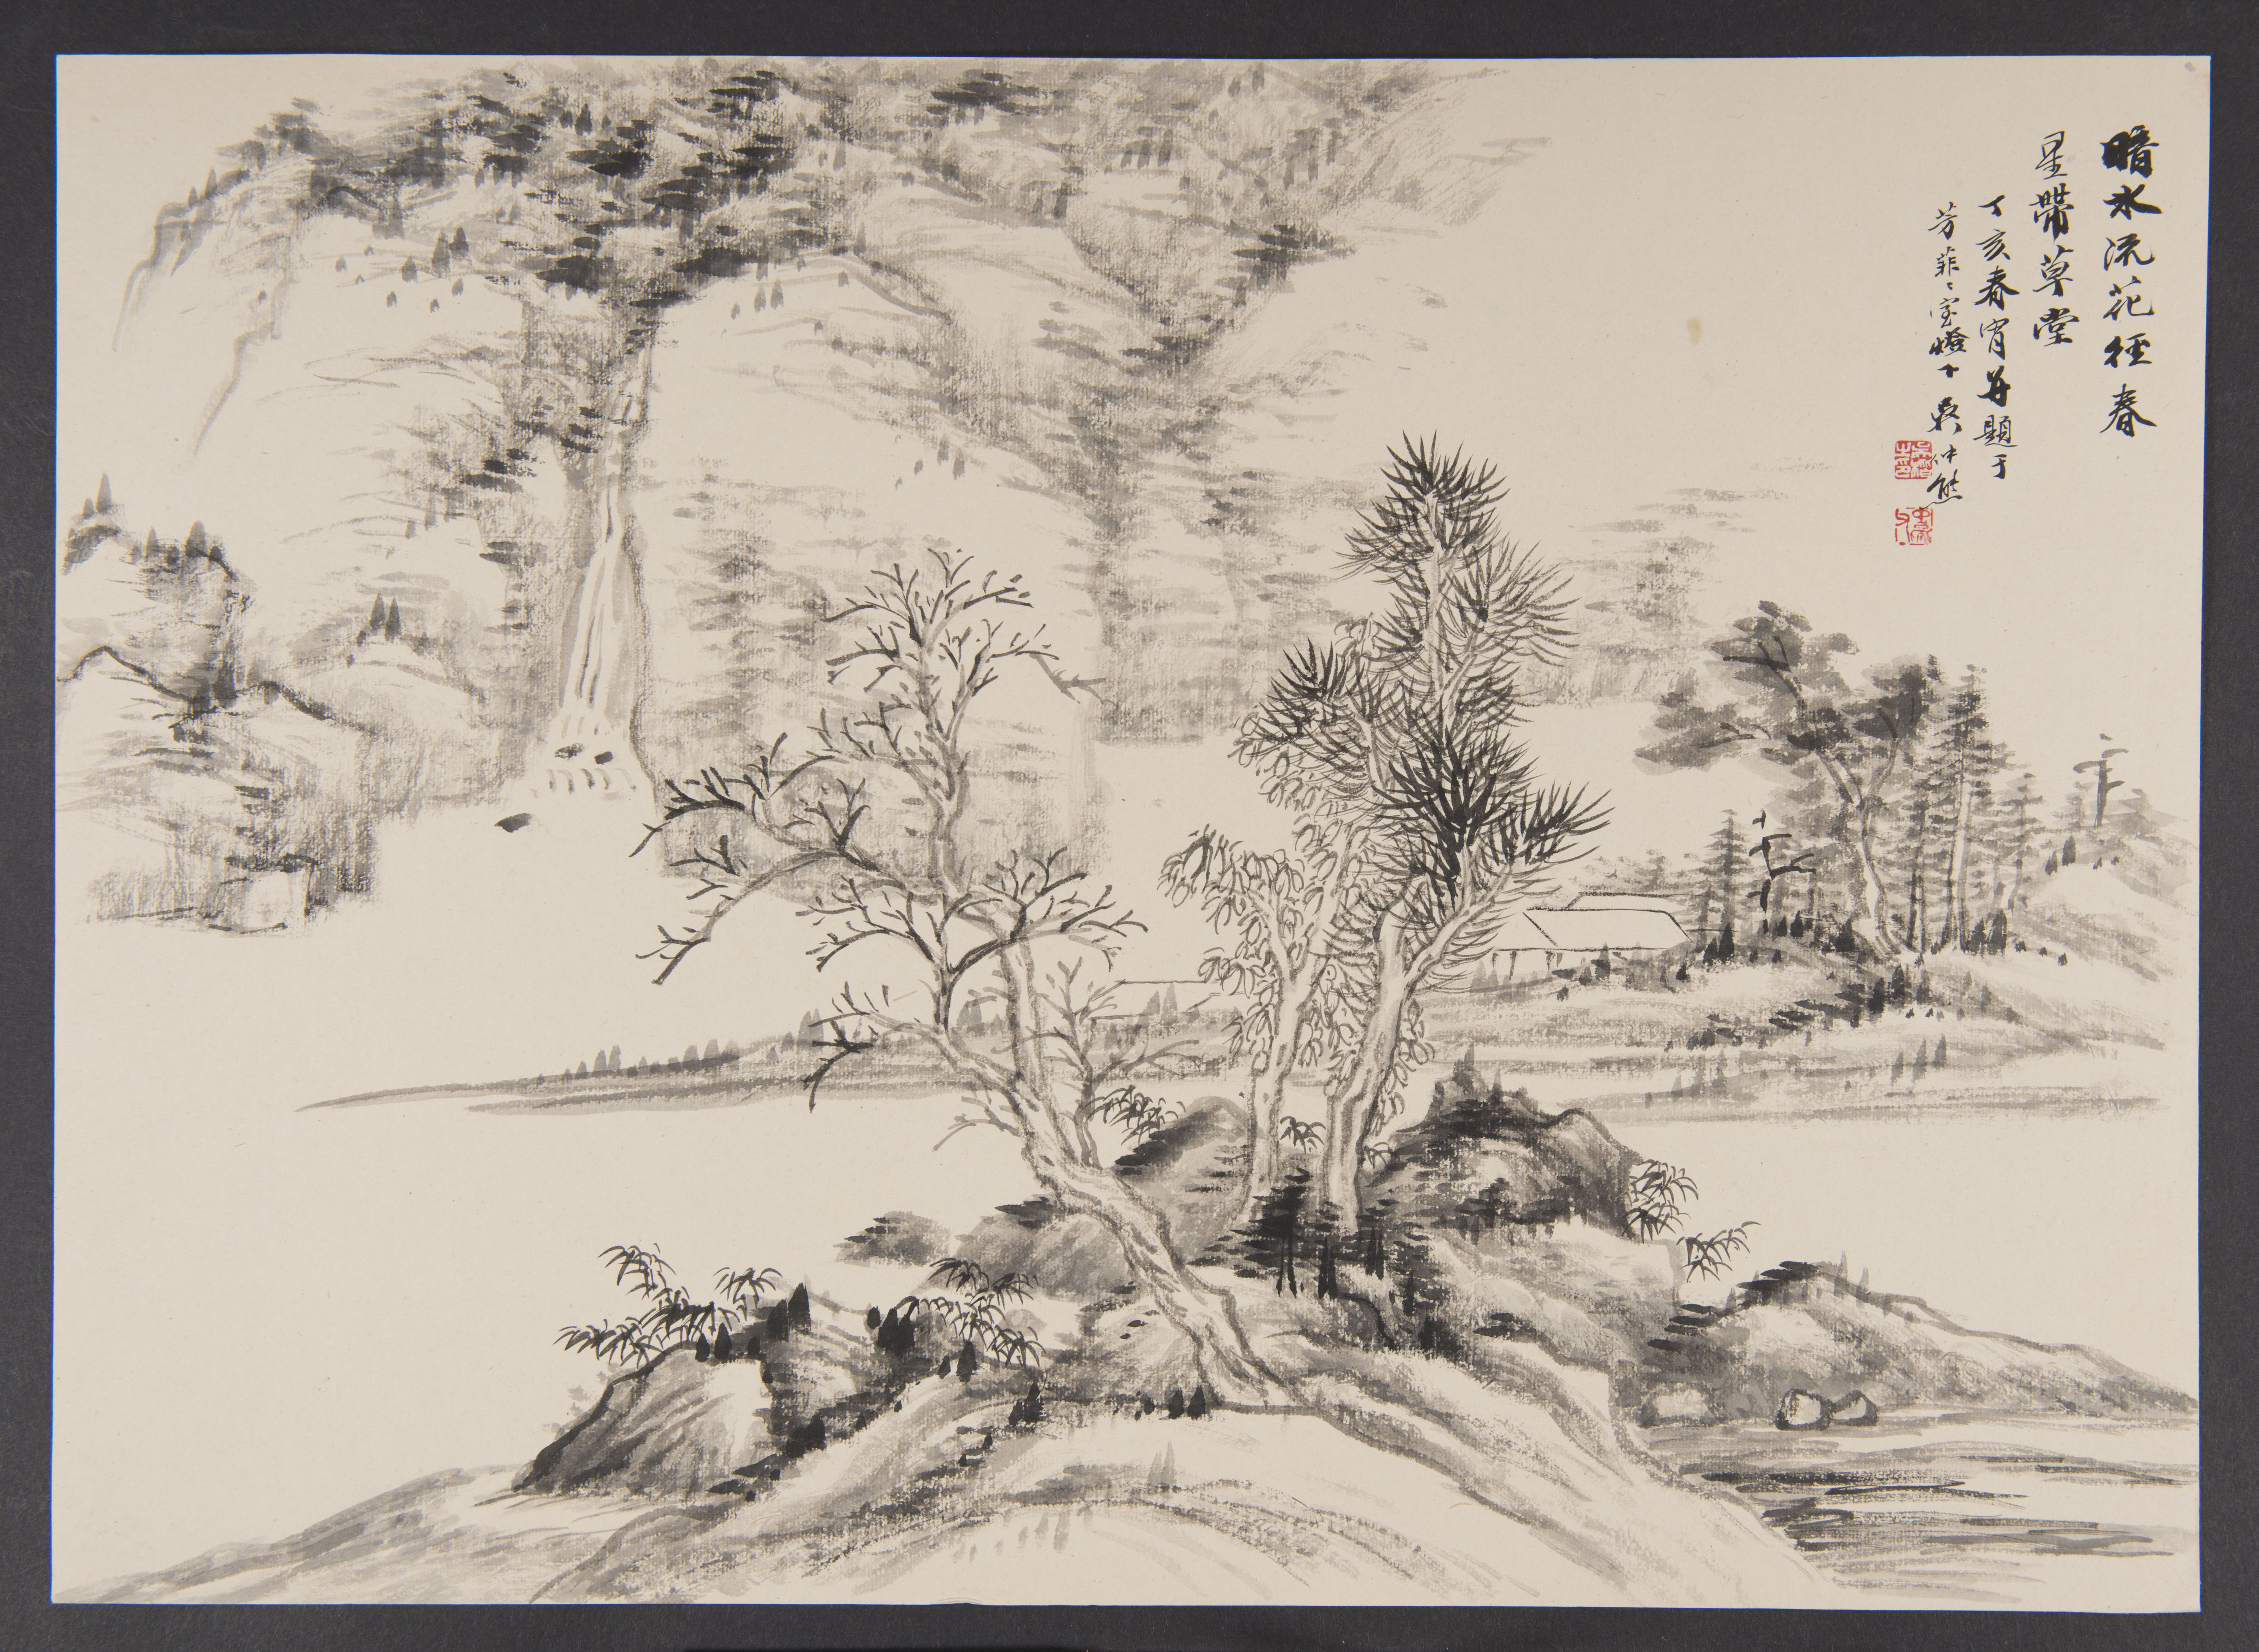 drawing of trees and buildings along a river bank